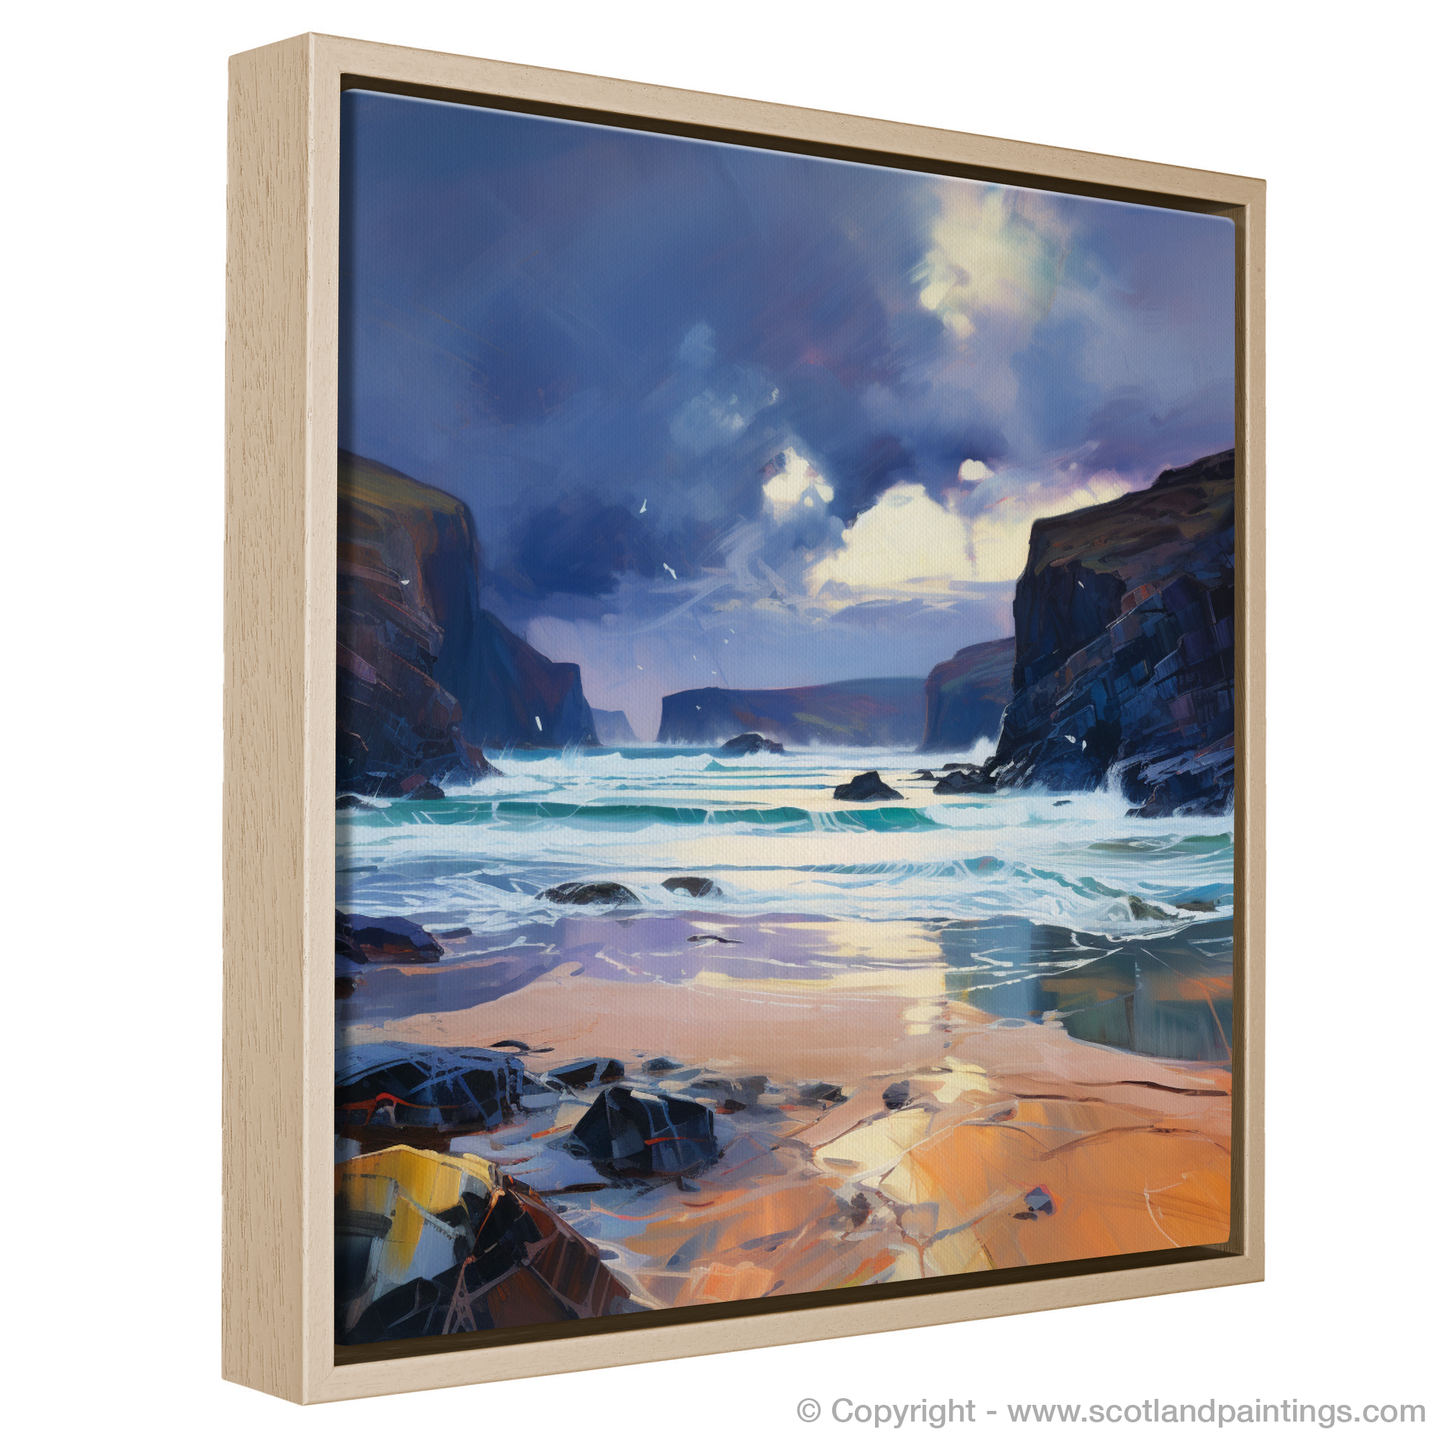 Painting and Art Print of Sandwood Bay with a stormy sky entitled "Storm over Sandwood Bay: An Expressionist Homage to Scotland's Rugged Shores".